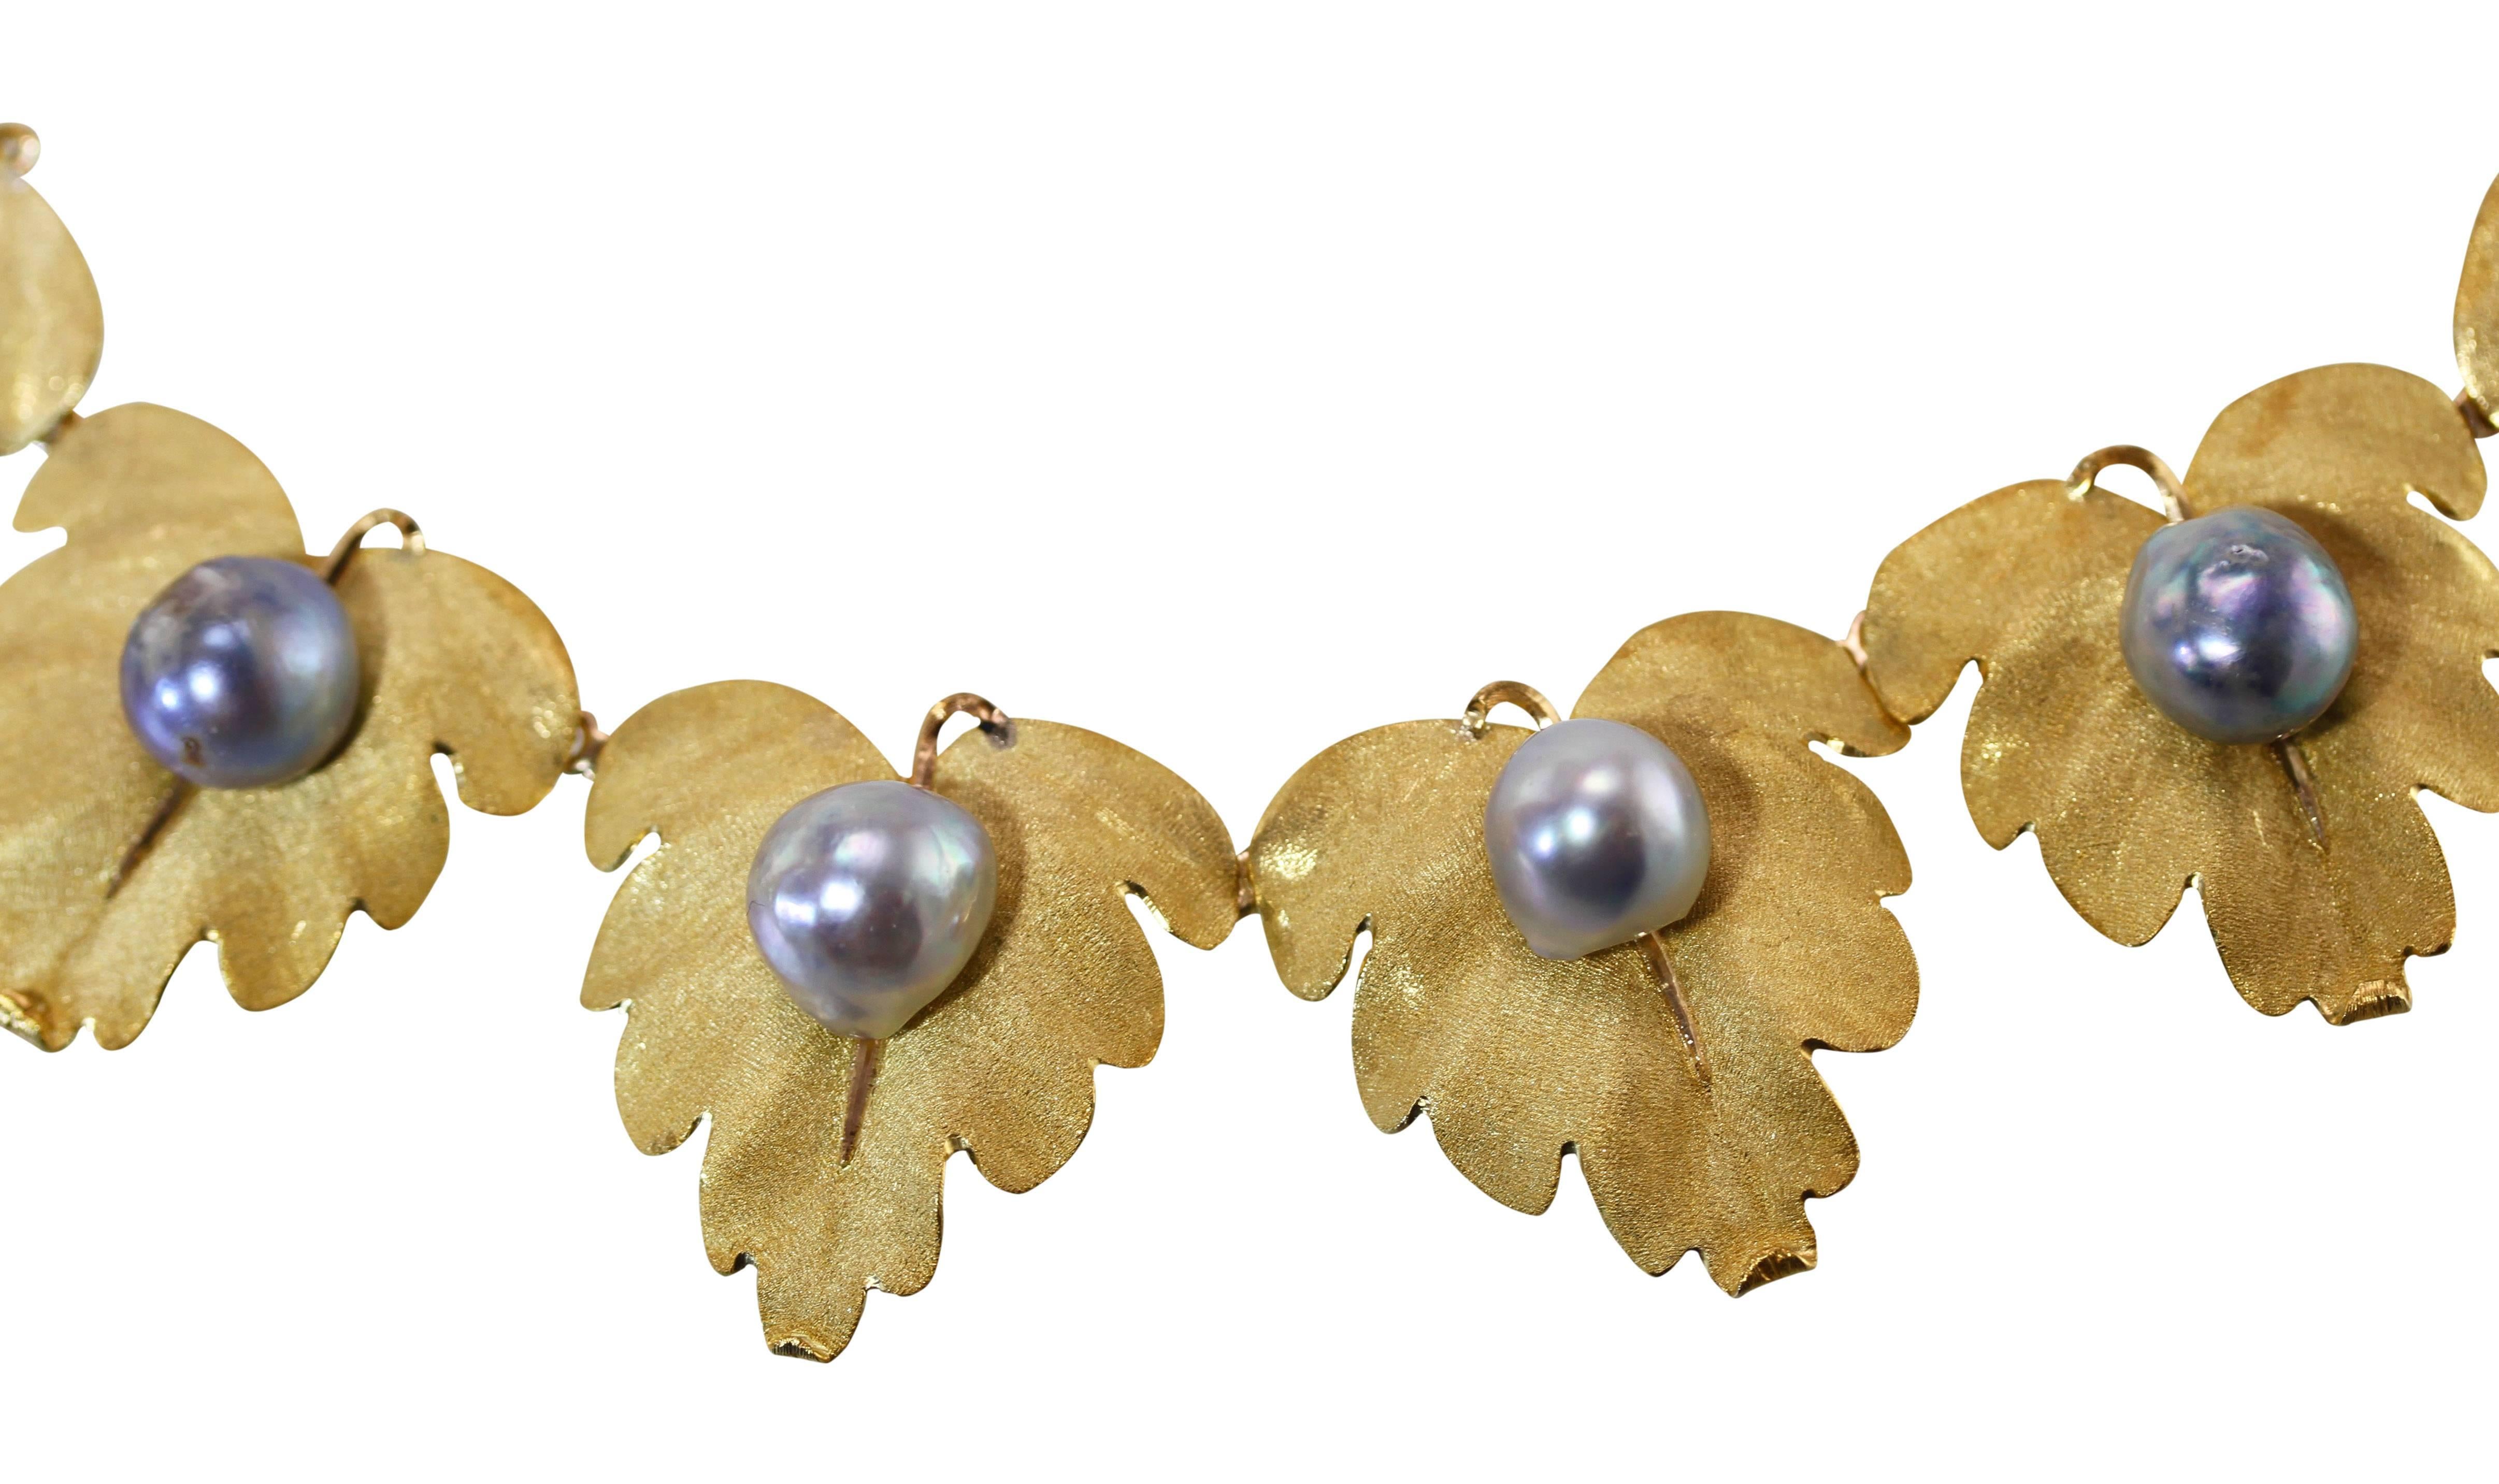 An 18 karat yellow gold and cultured pearl necklace by Buccellati, Italy, designed as sixteen textured gold leaves each set with a baroque cultured pearl, length 18 1/2 inches, width 1 1/8 inches, gross weight 117.7 grams, signed Buccellati, stamped